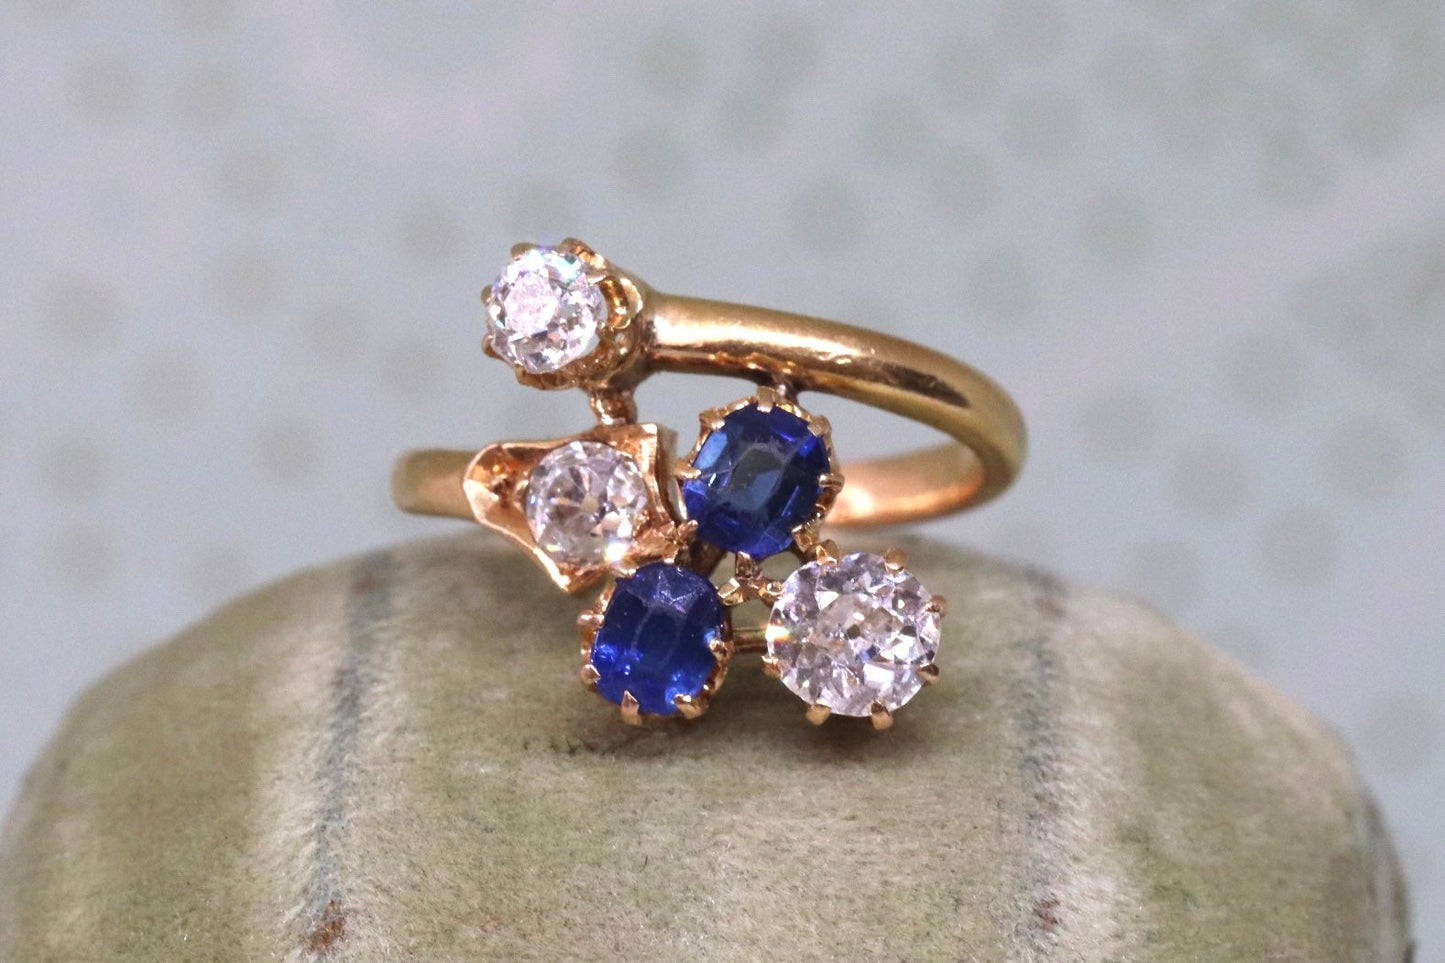 Authentic art nouveau 18k yellow gold old mine cut diamond and natural sapphire ring size 5.5 (sizable)